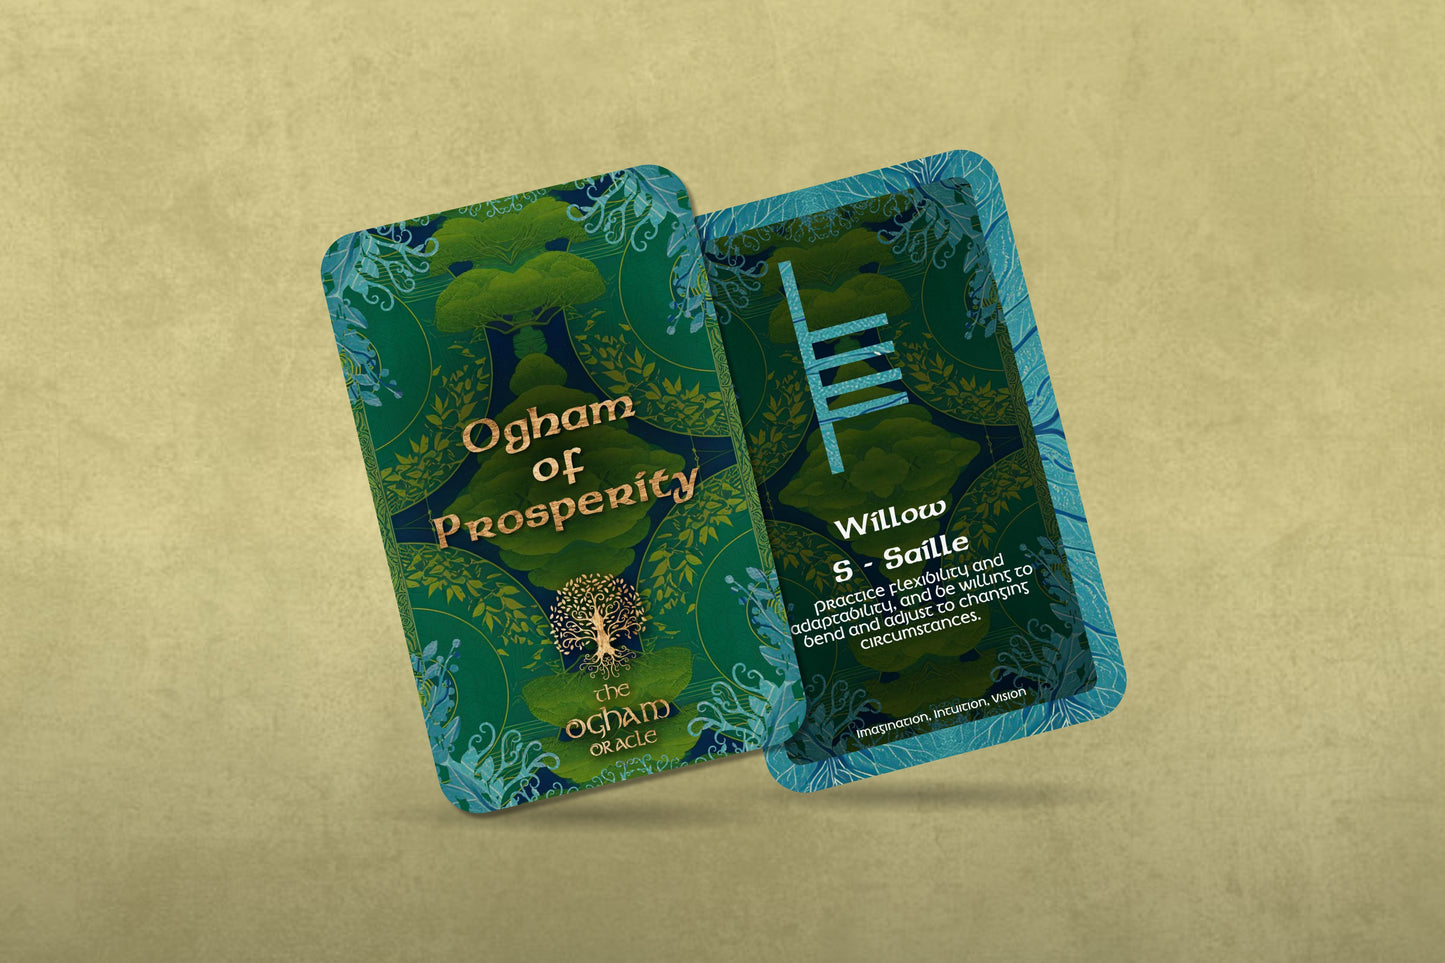 Ogham of Prosperity - The Ogham Oracle